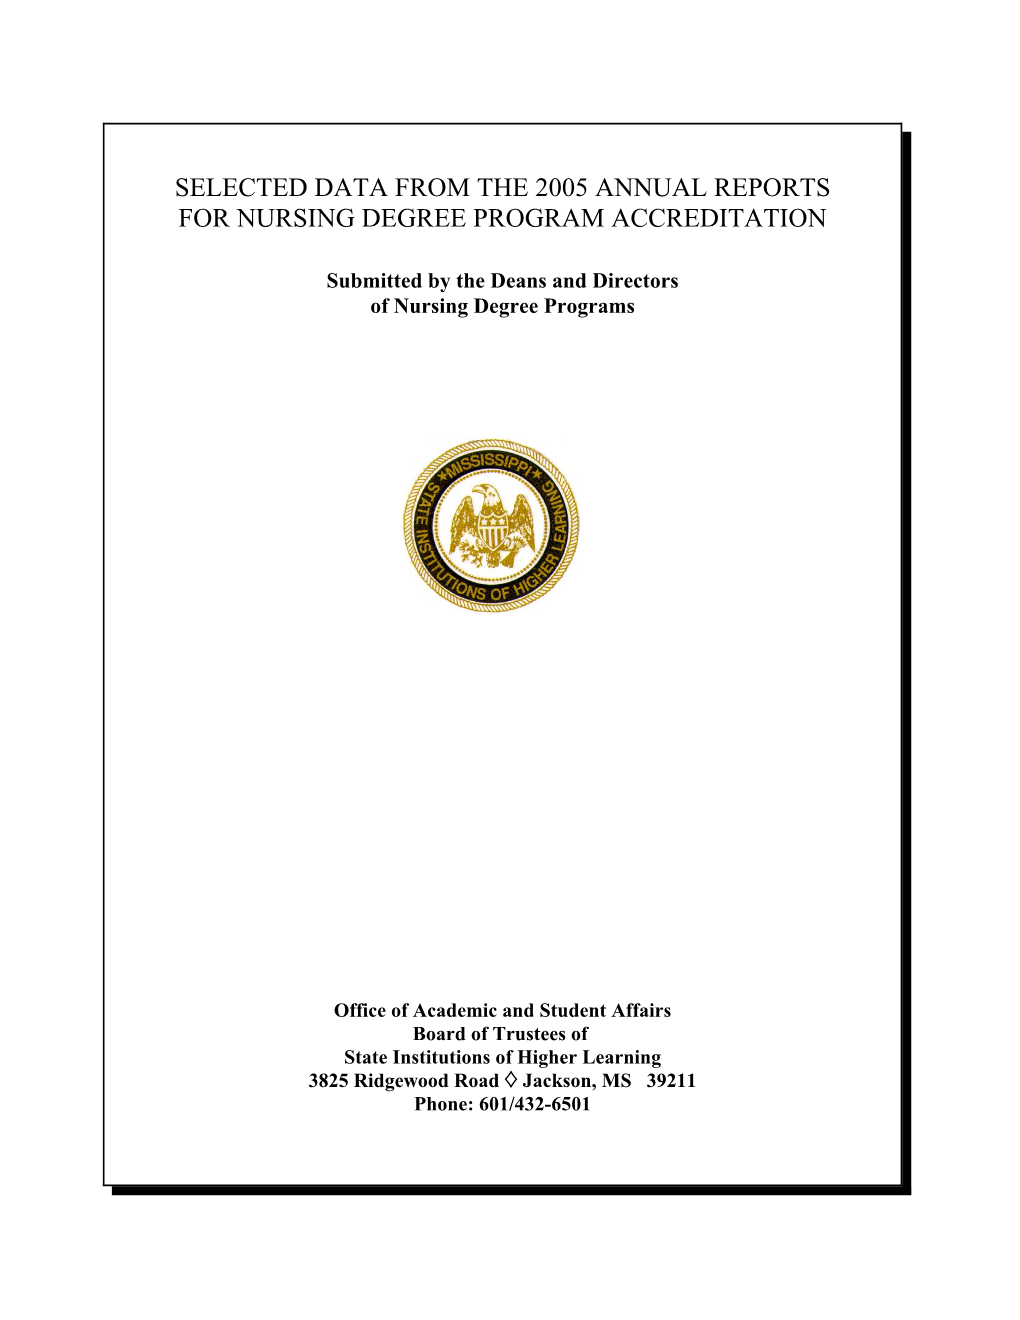 Selected Data from the 2005 Annual Reports for Nursing Degree Program Accreditation